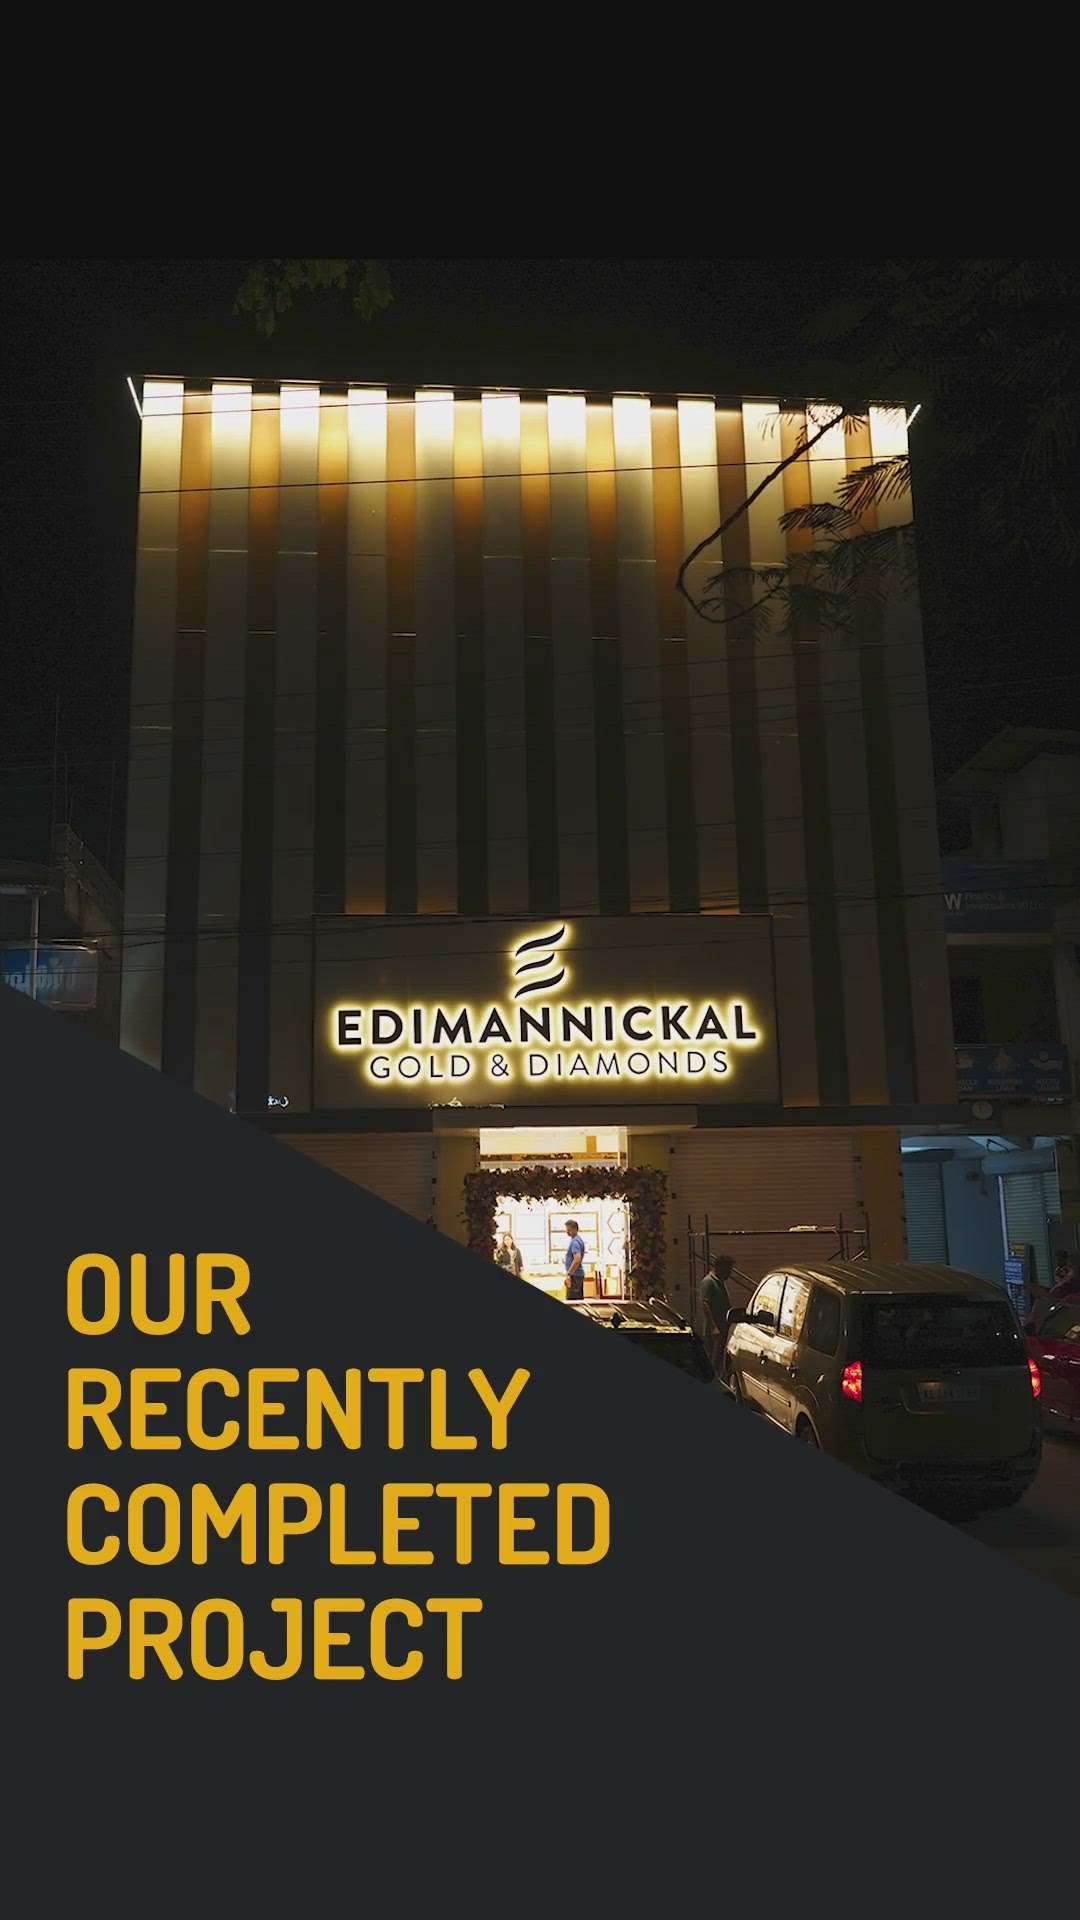 Our Recently Completed Project📍
EDIMANNICKAL FASHION JEWELLERY.

The Next Project is Yours...

Call us right away for further details.
📲+919961291119
📩 interiorumi@gmail.com
🌐 https://umiinterior.com/

"We Create, You Celebrate"
.
.
.
#UMIInteriors #Interiors #CommercialSpace #InteriorDesign #LuxuryLifeStyle #InteriorLovers #ResidentialDesign #InteriorReels #InteriorCommercial #InteriorReel #Reels #InstagramReels #CommercialInteriors #JewelleryReels  #HospitalityInteriors #Kerala #India